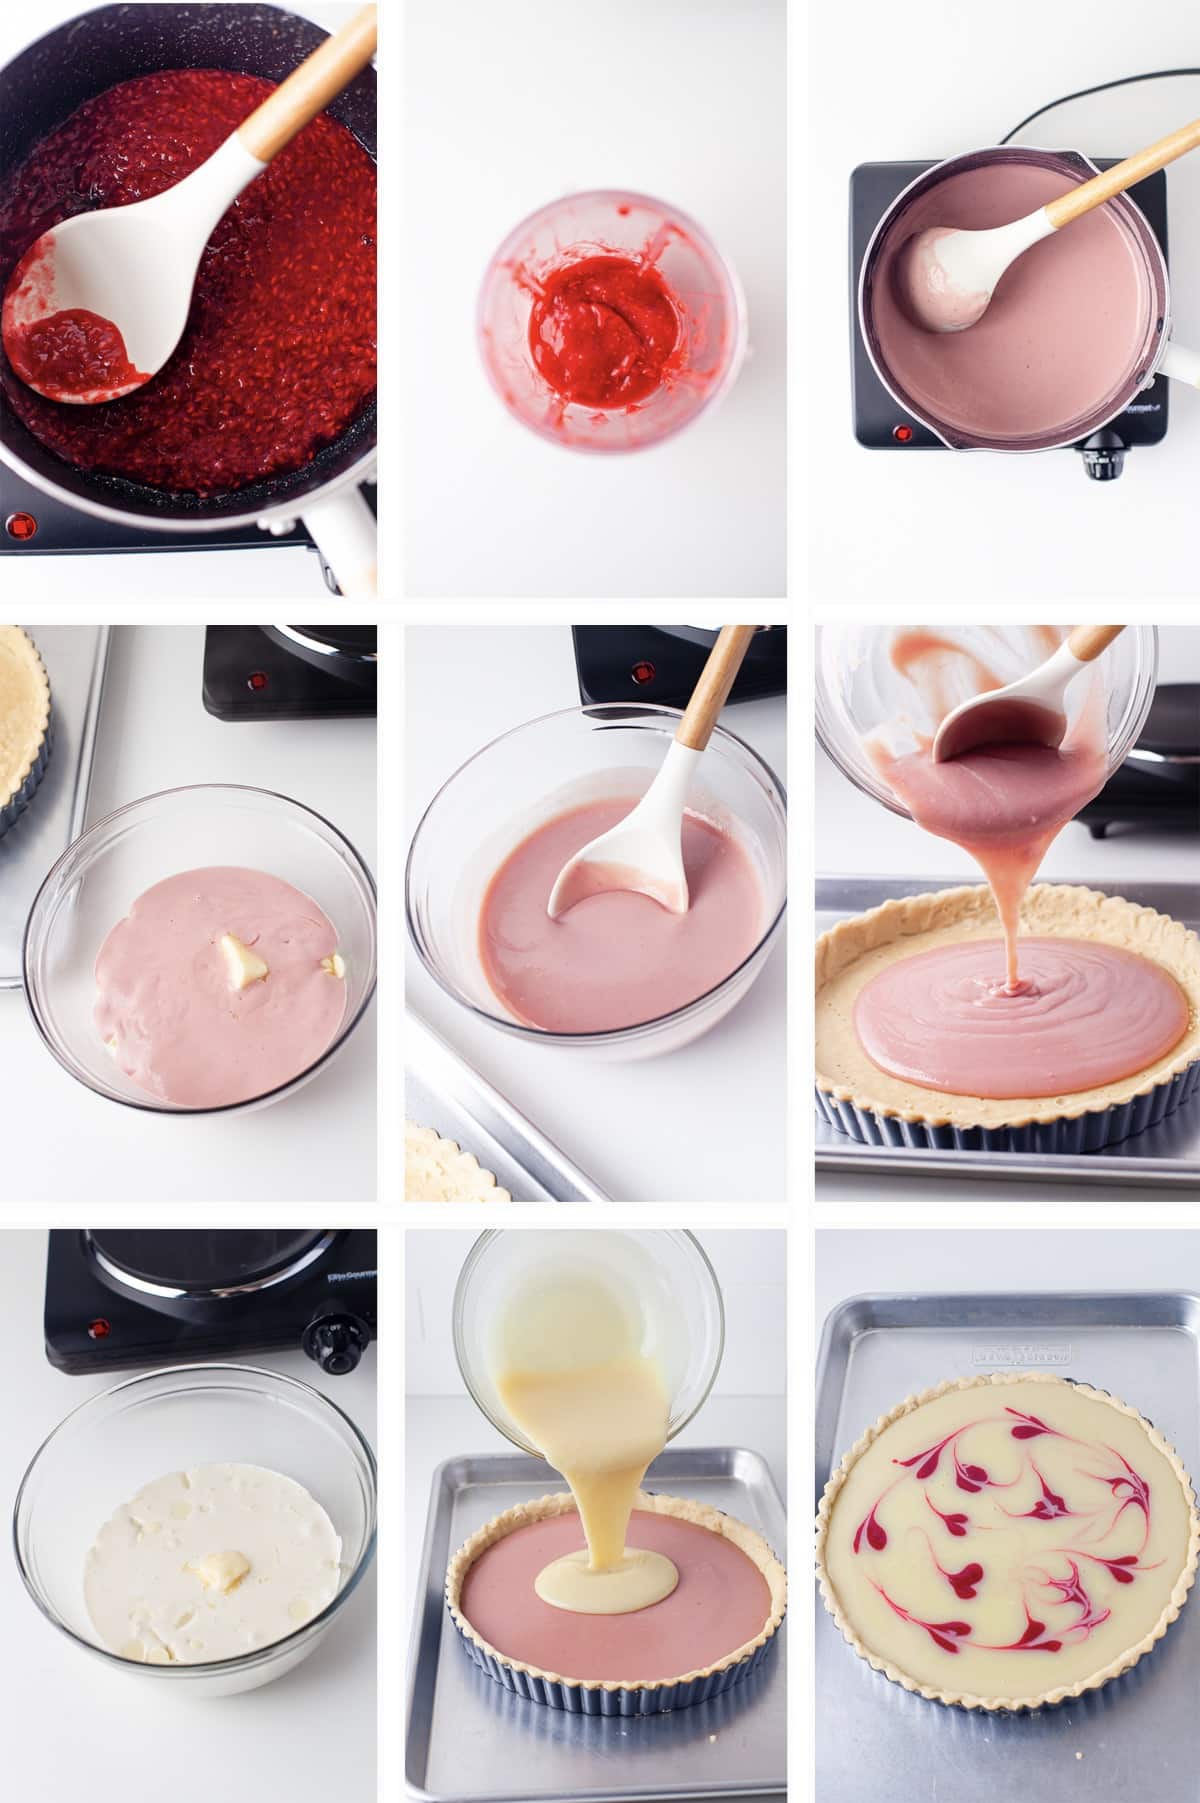 Collage of images showing how to make the fillings and assembly for Raspberry Tart on a white countertop